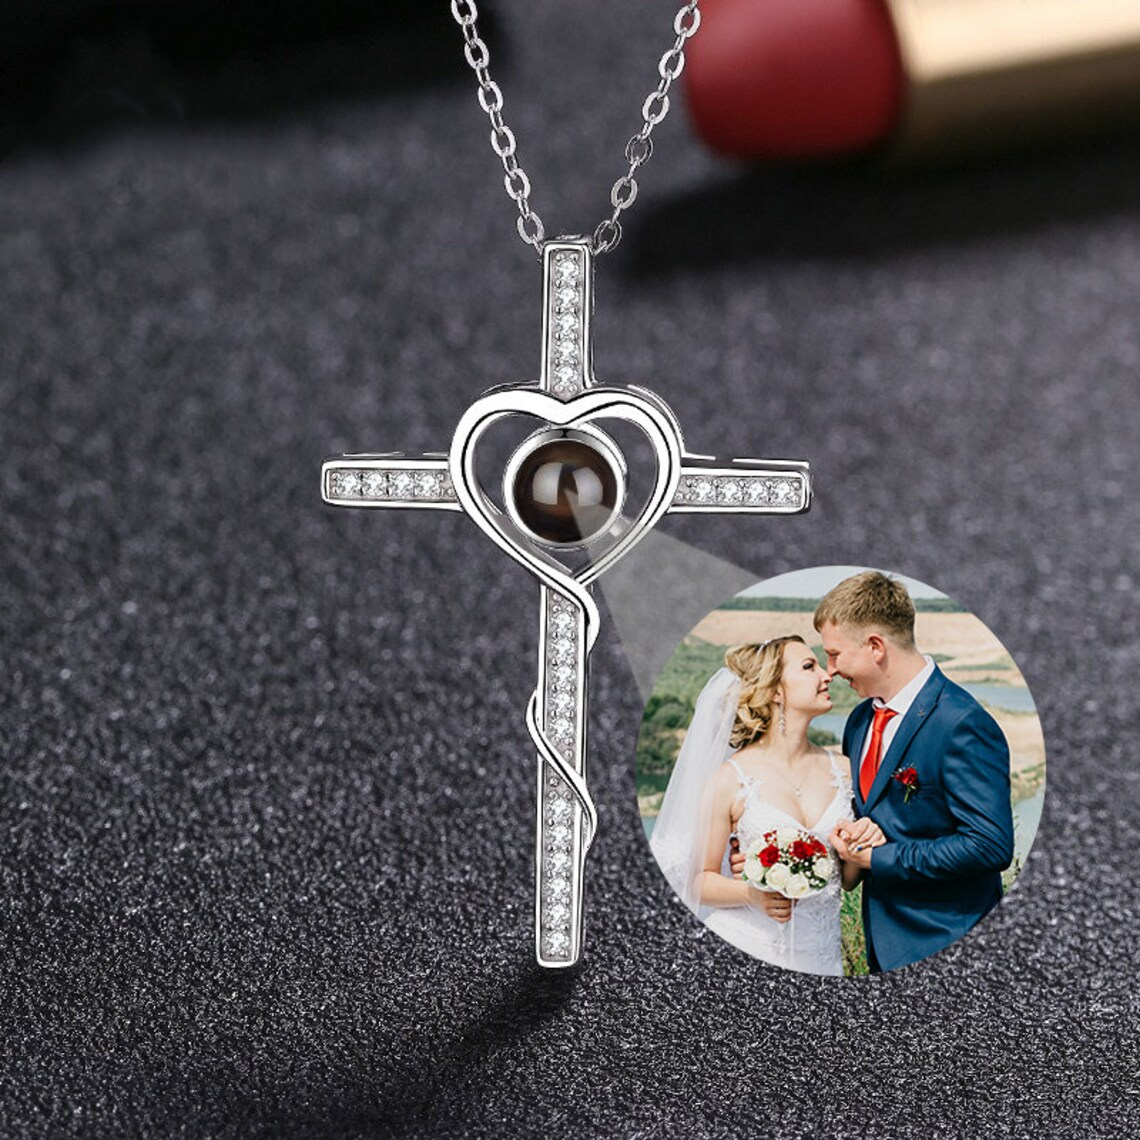 Cross Necklace Personalized Picture Inside Pendant Photo Projection Necklace